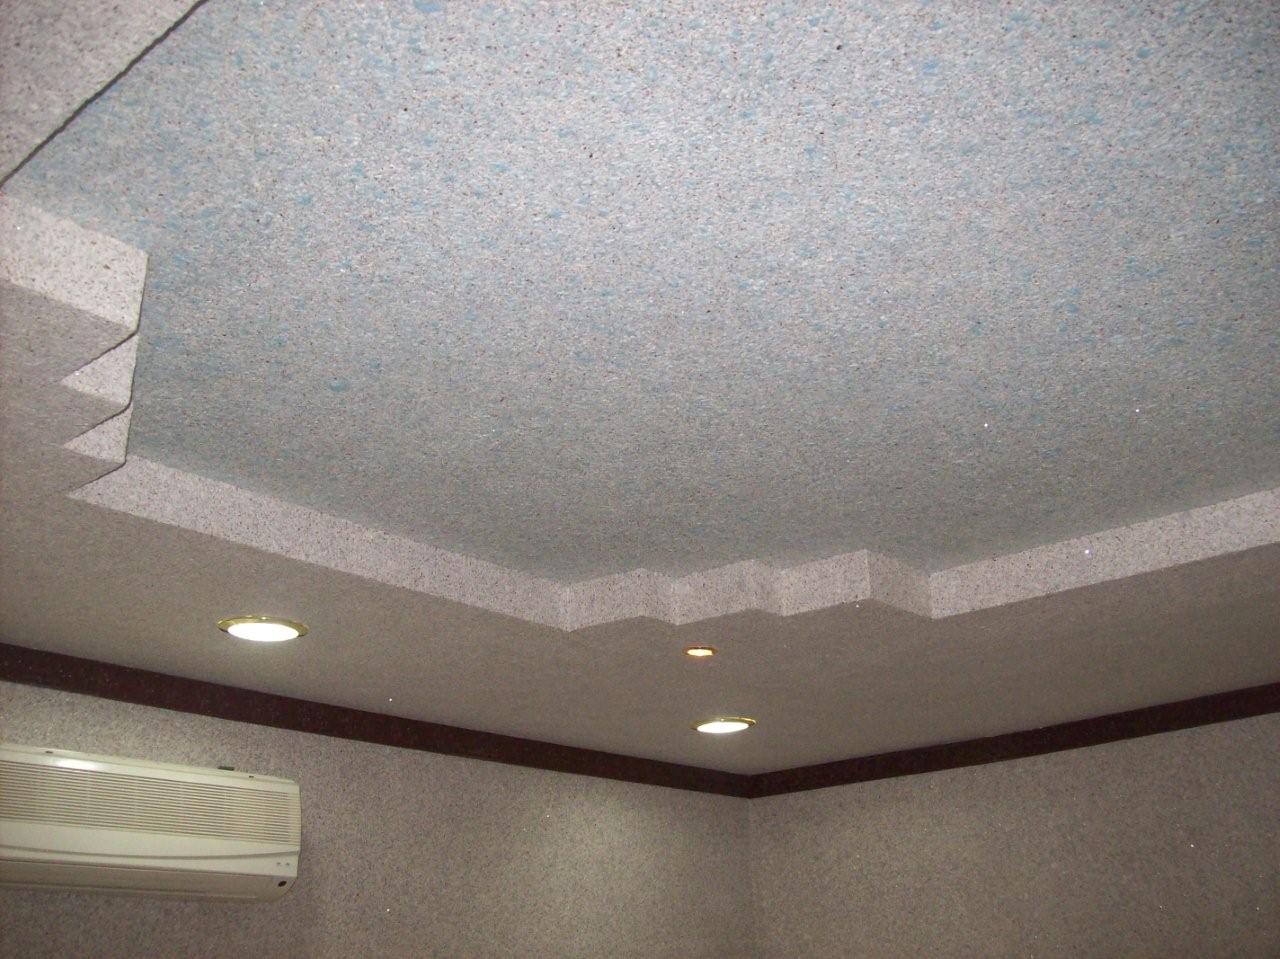 Liquid wallpaper for the ceiling trimming